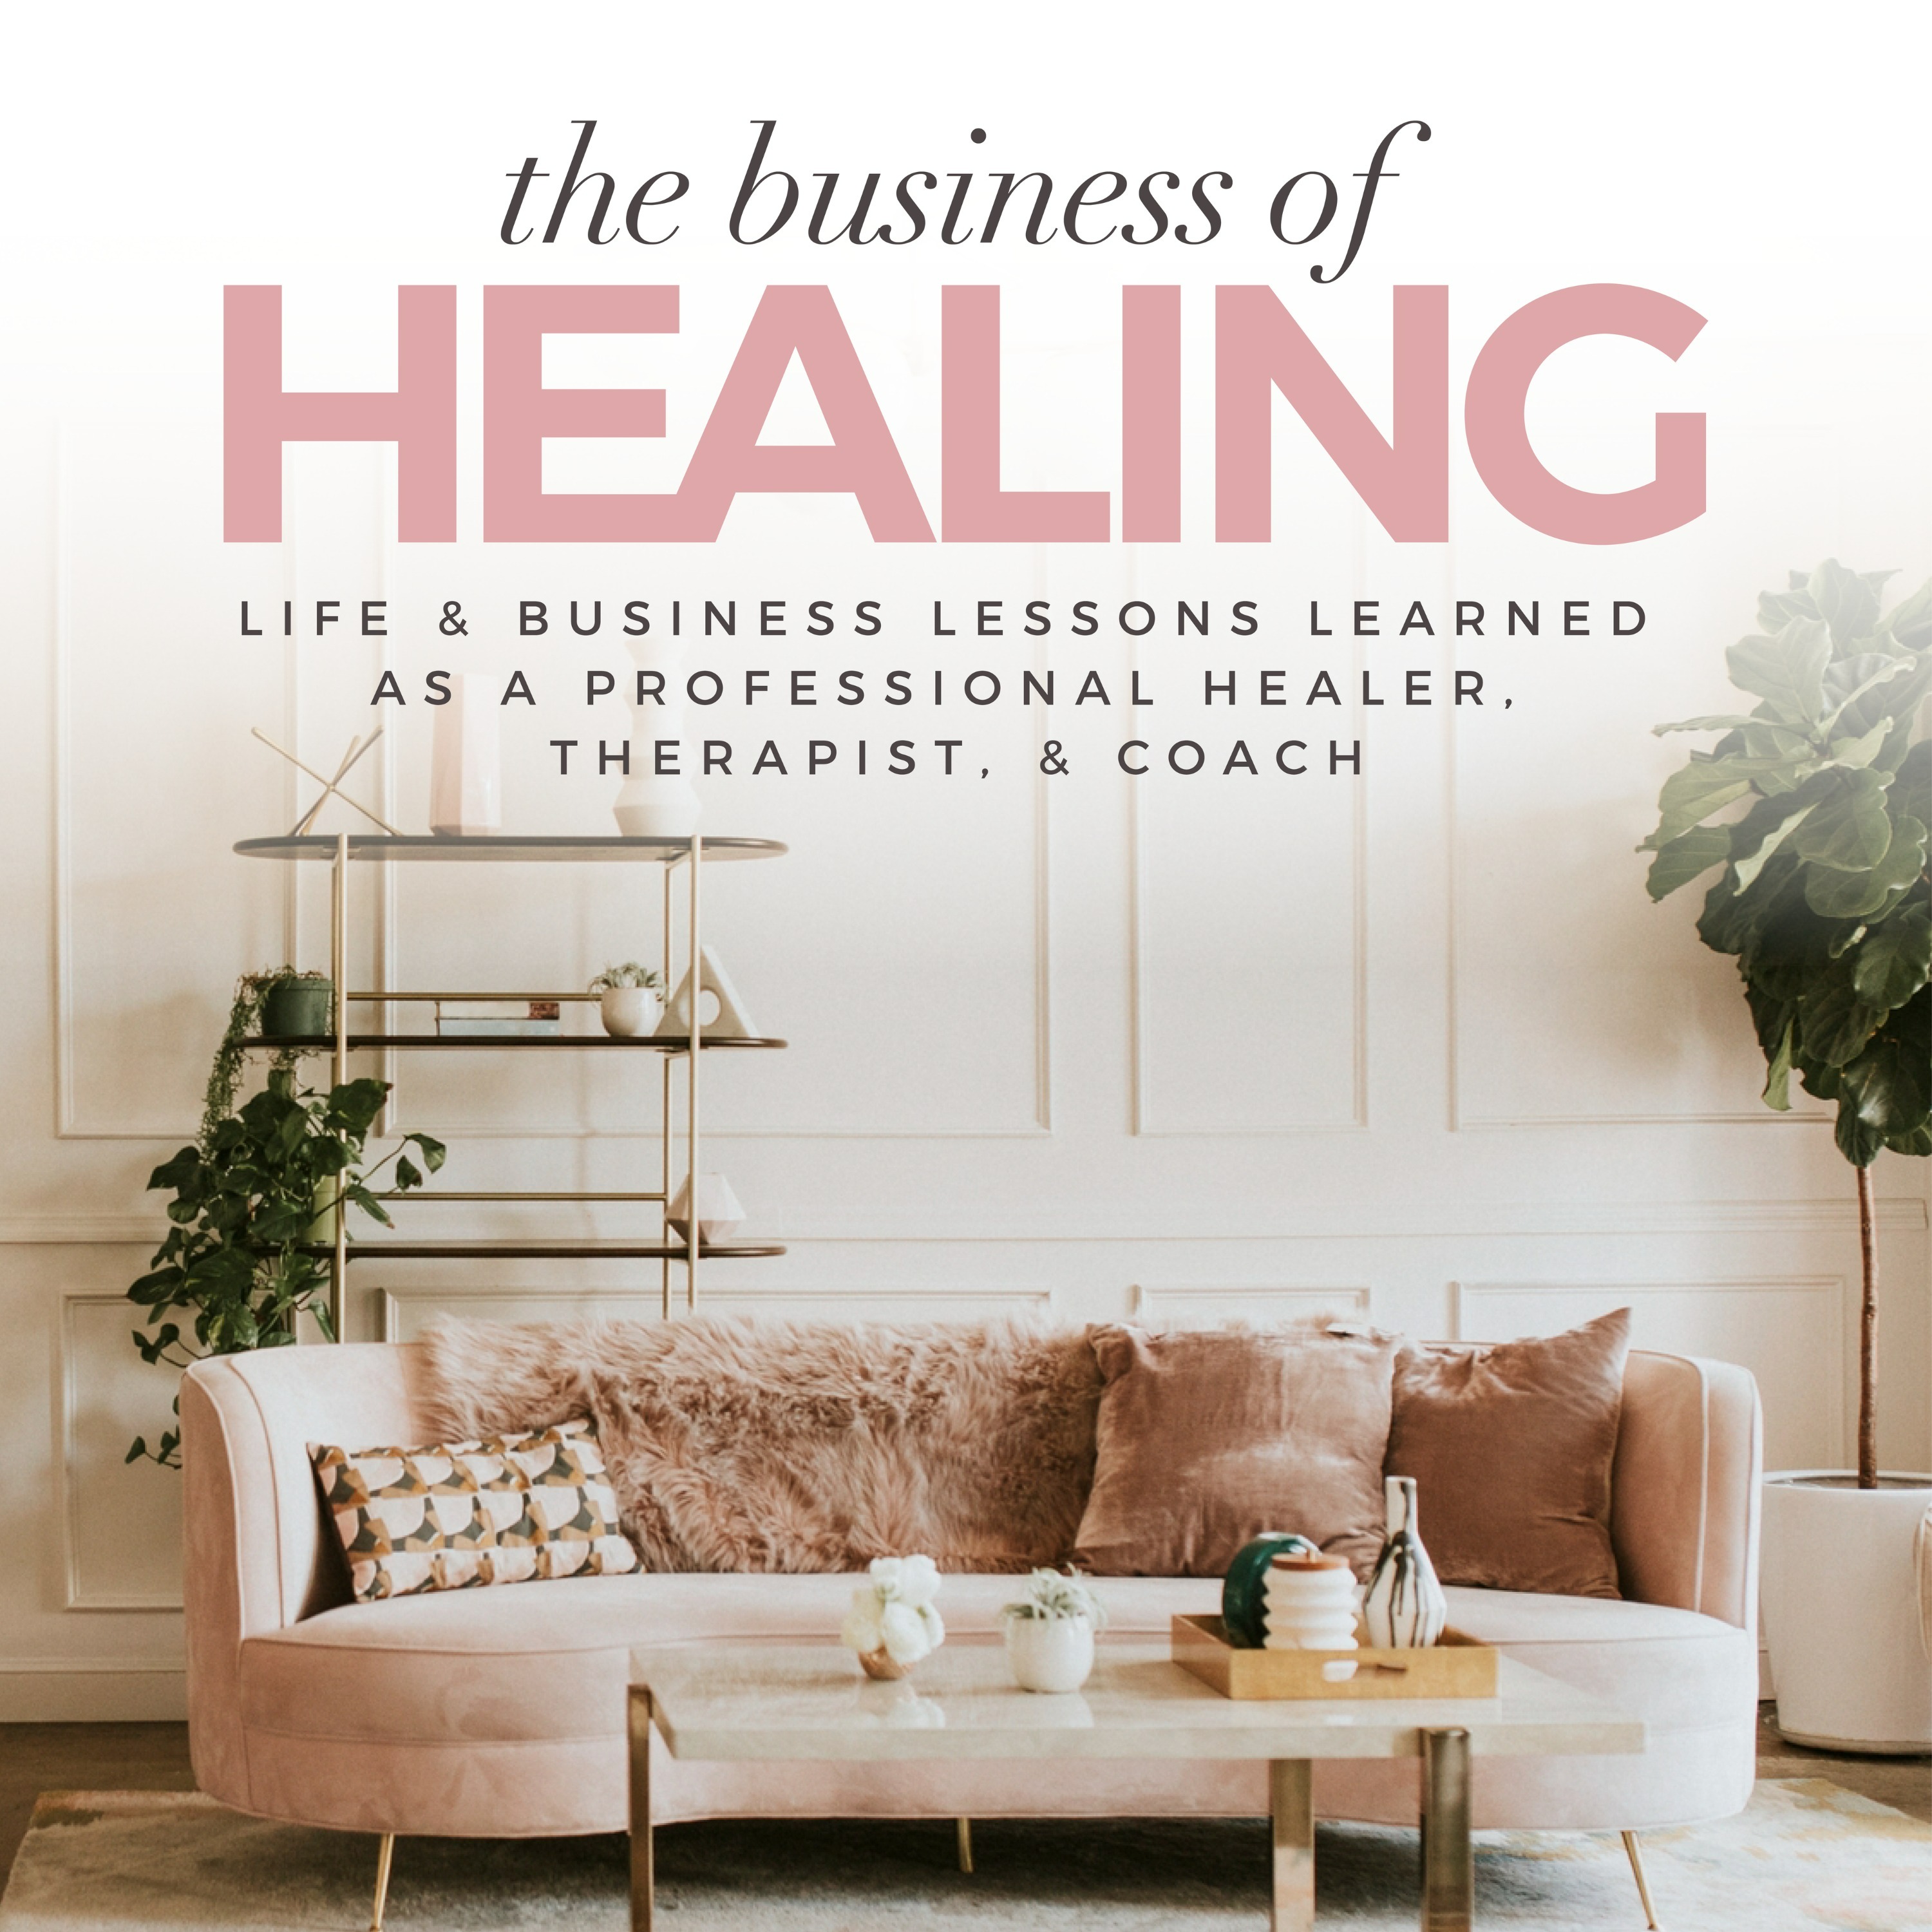 Now Introducing The Business of Healing Podcast!